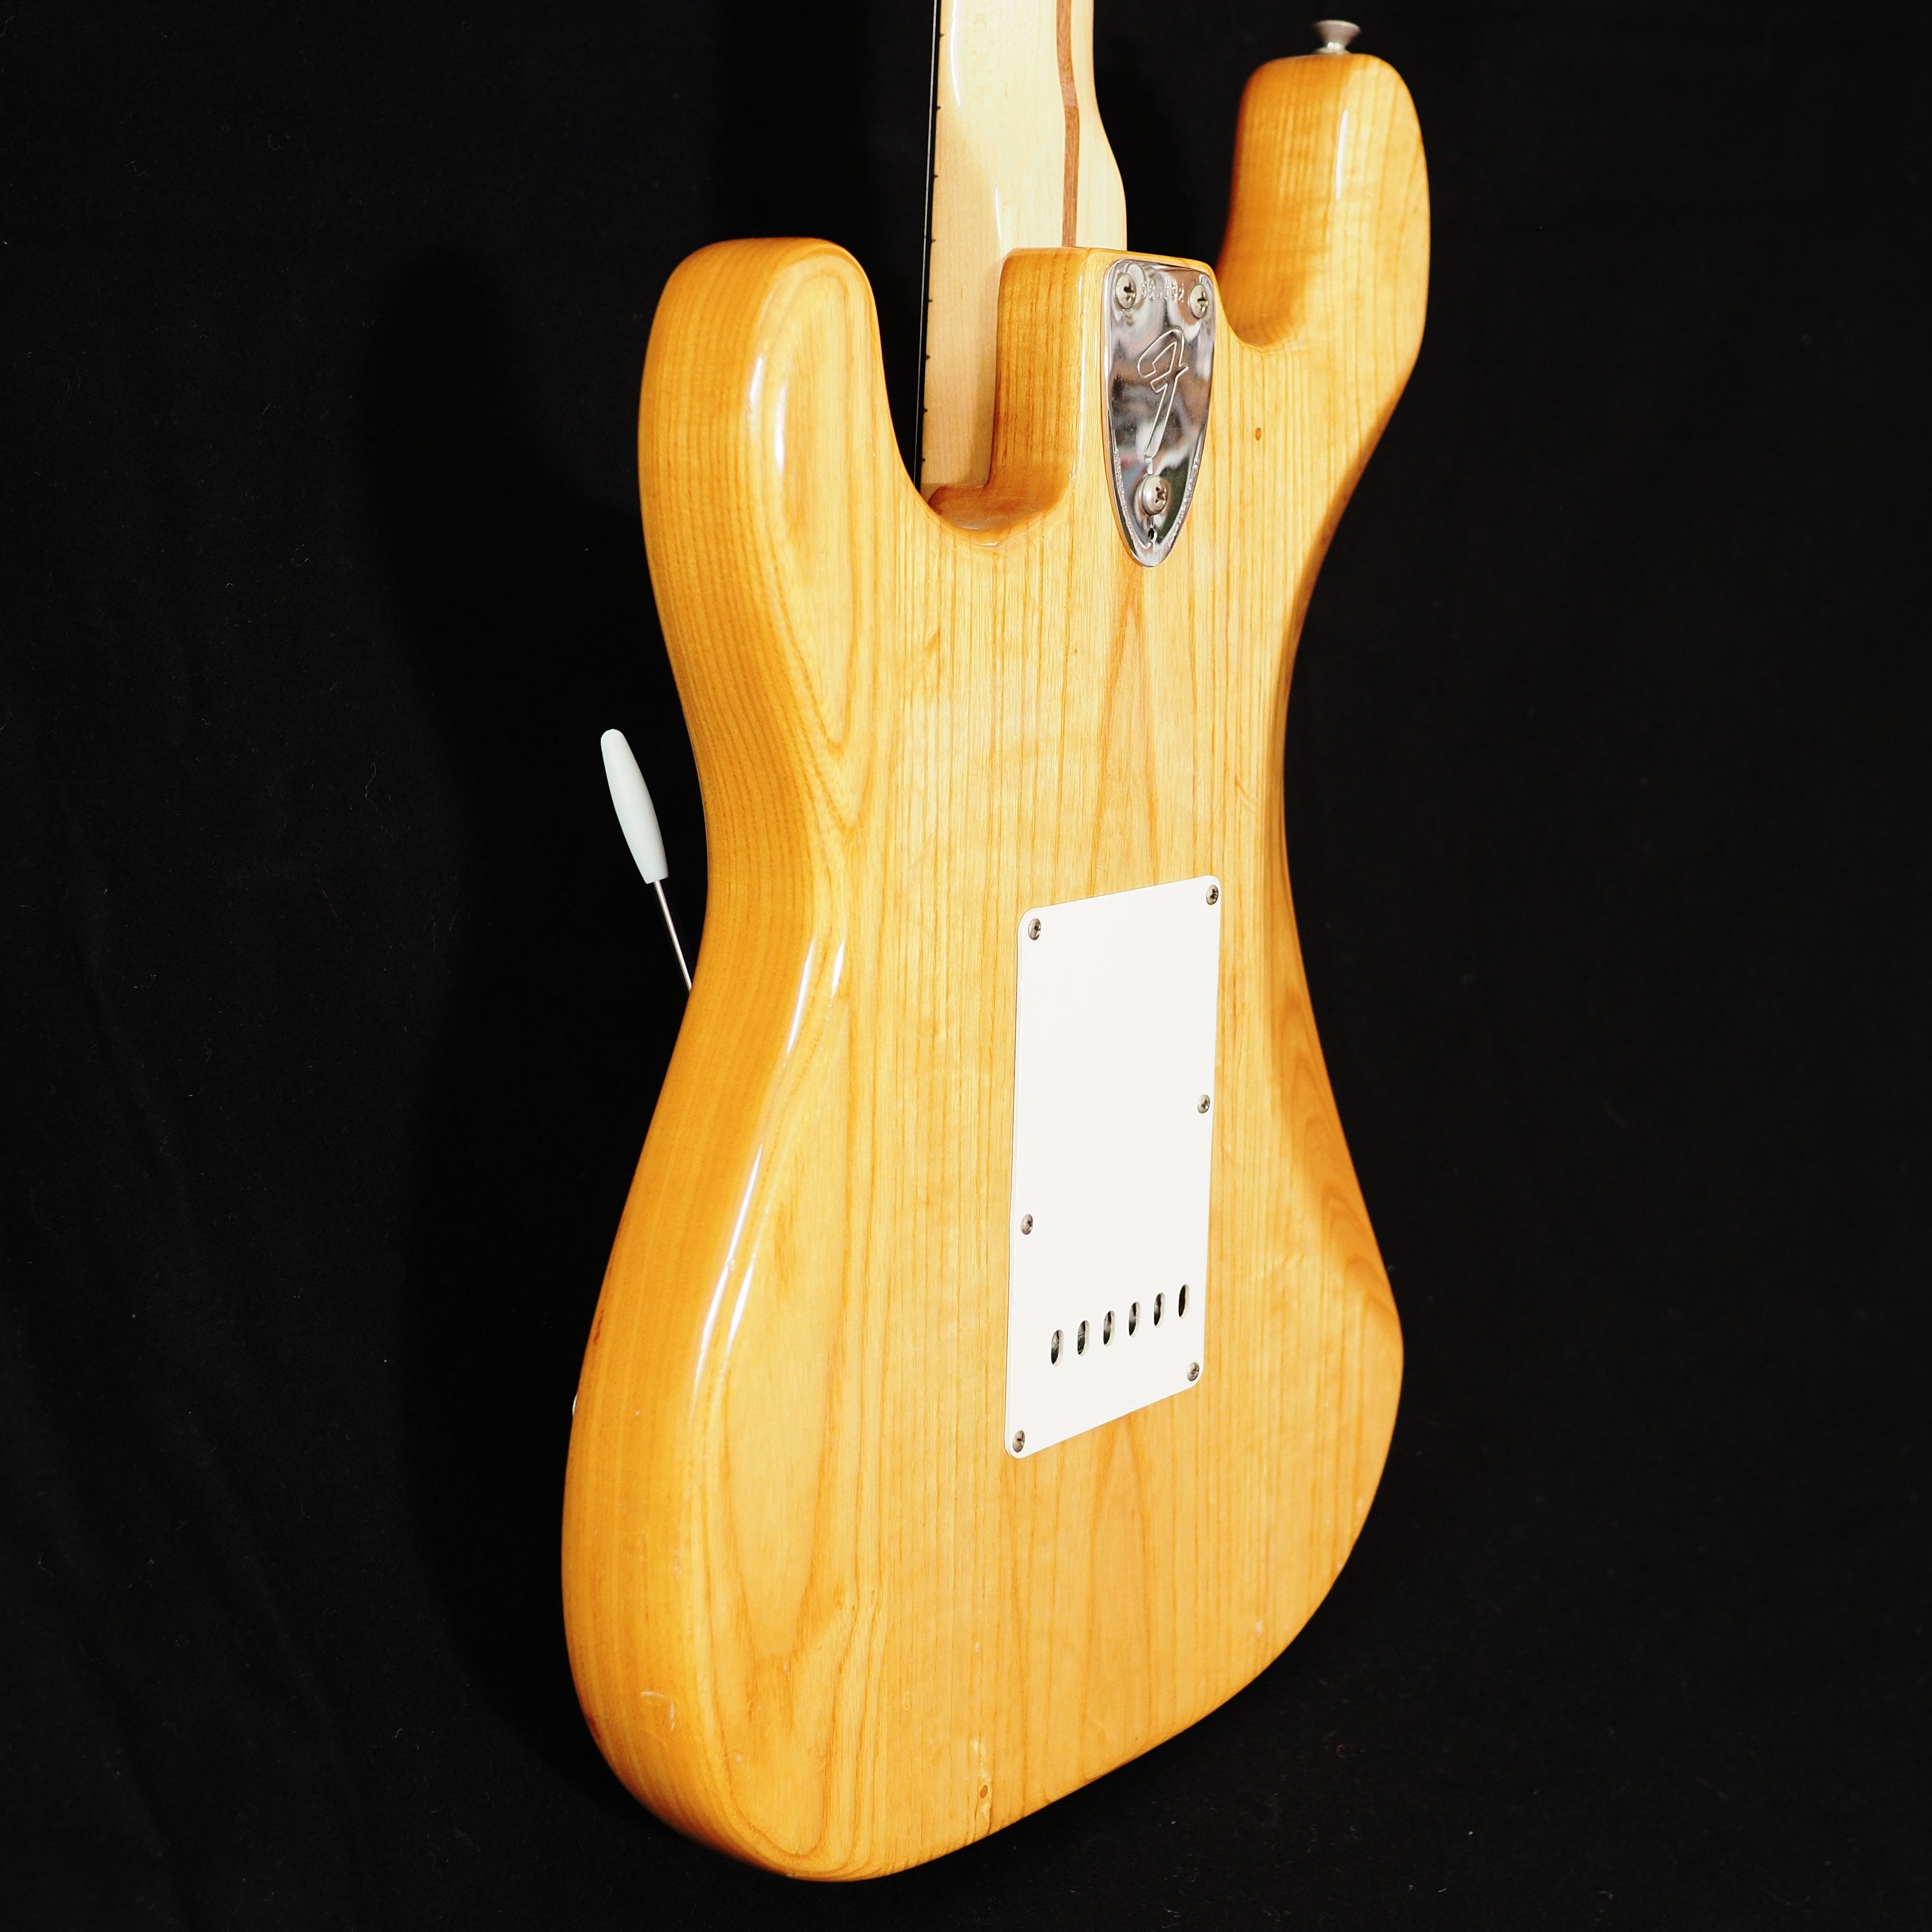 Fender Stratocaster in Natural Ash from 1974 - wurst.guitars